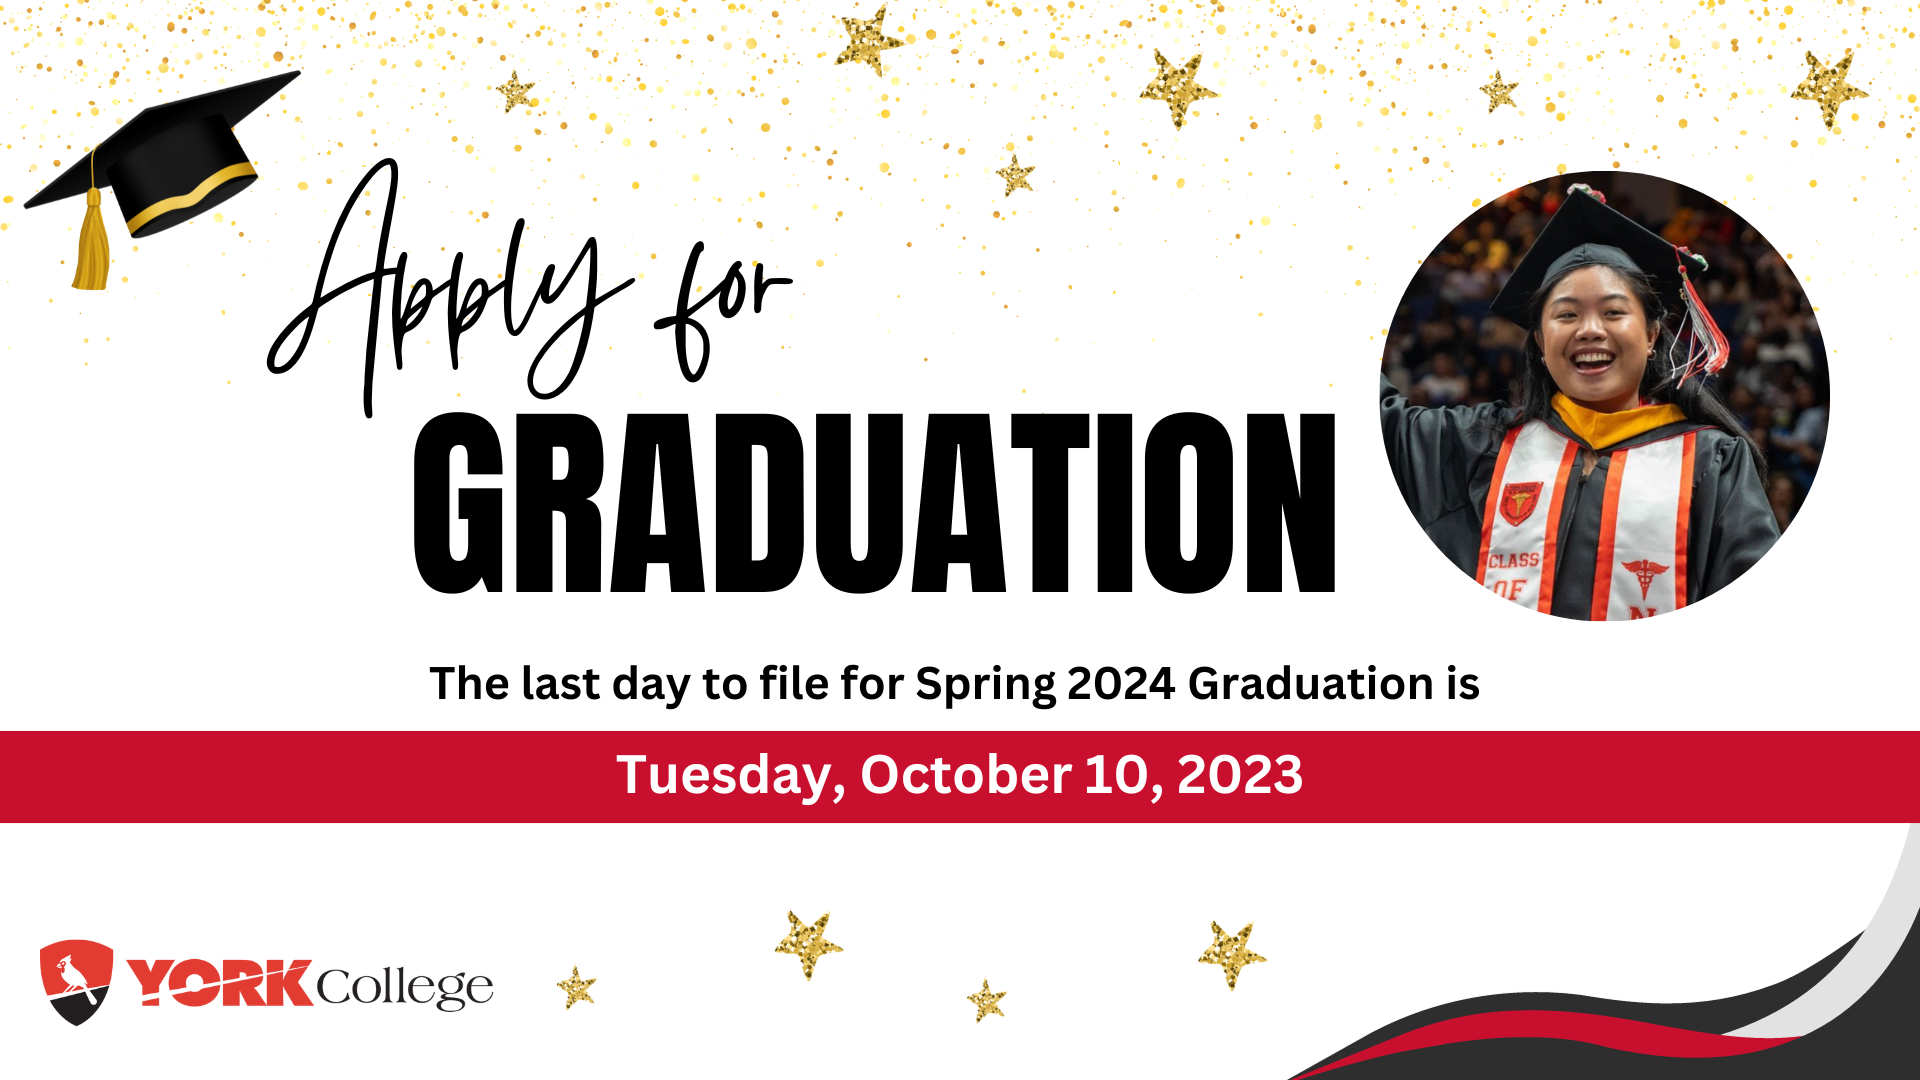 Last day to file for Spring 2024 Graduation